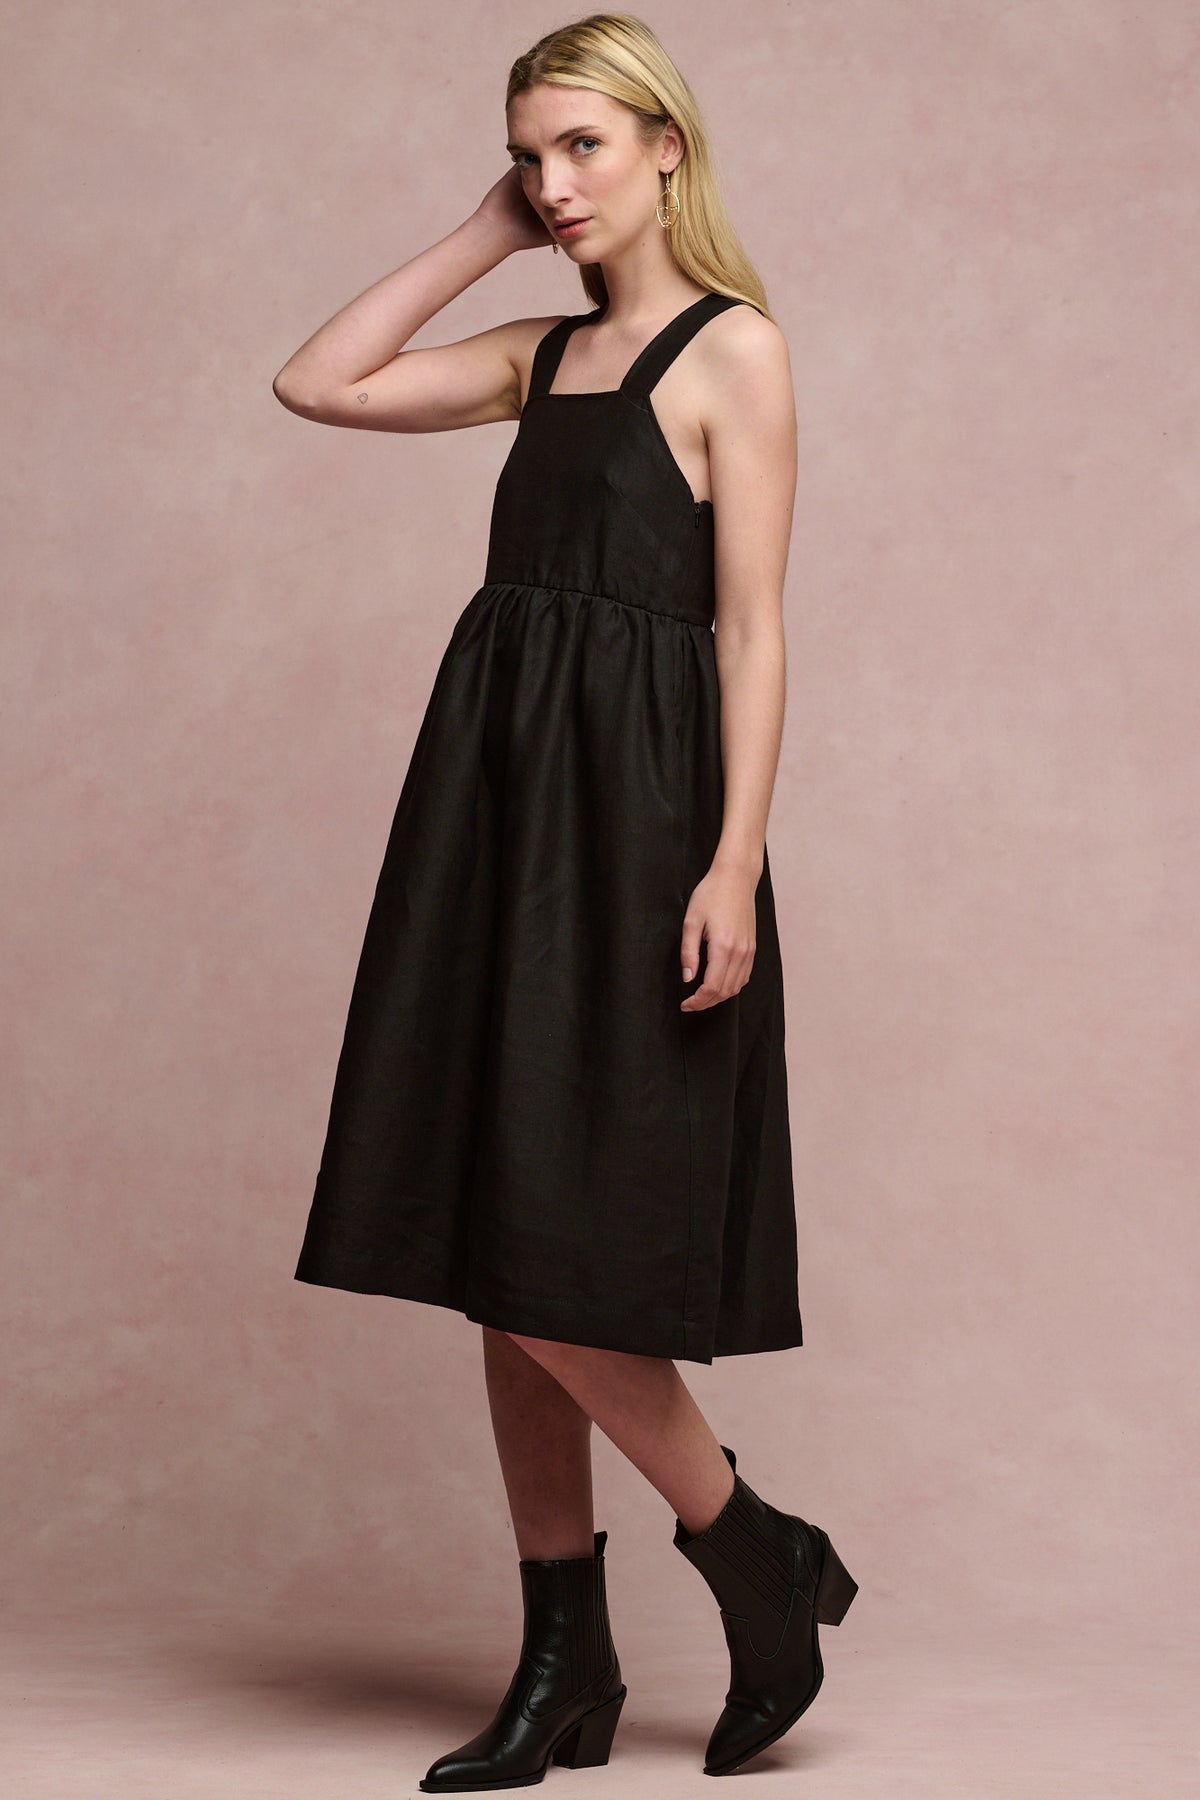 
            Full body image of fair skinned, blonde female wearing linen sun dress in black paired with black heeled boots